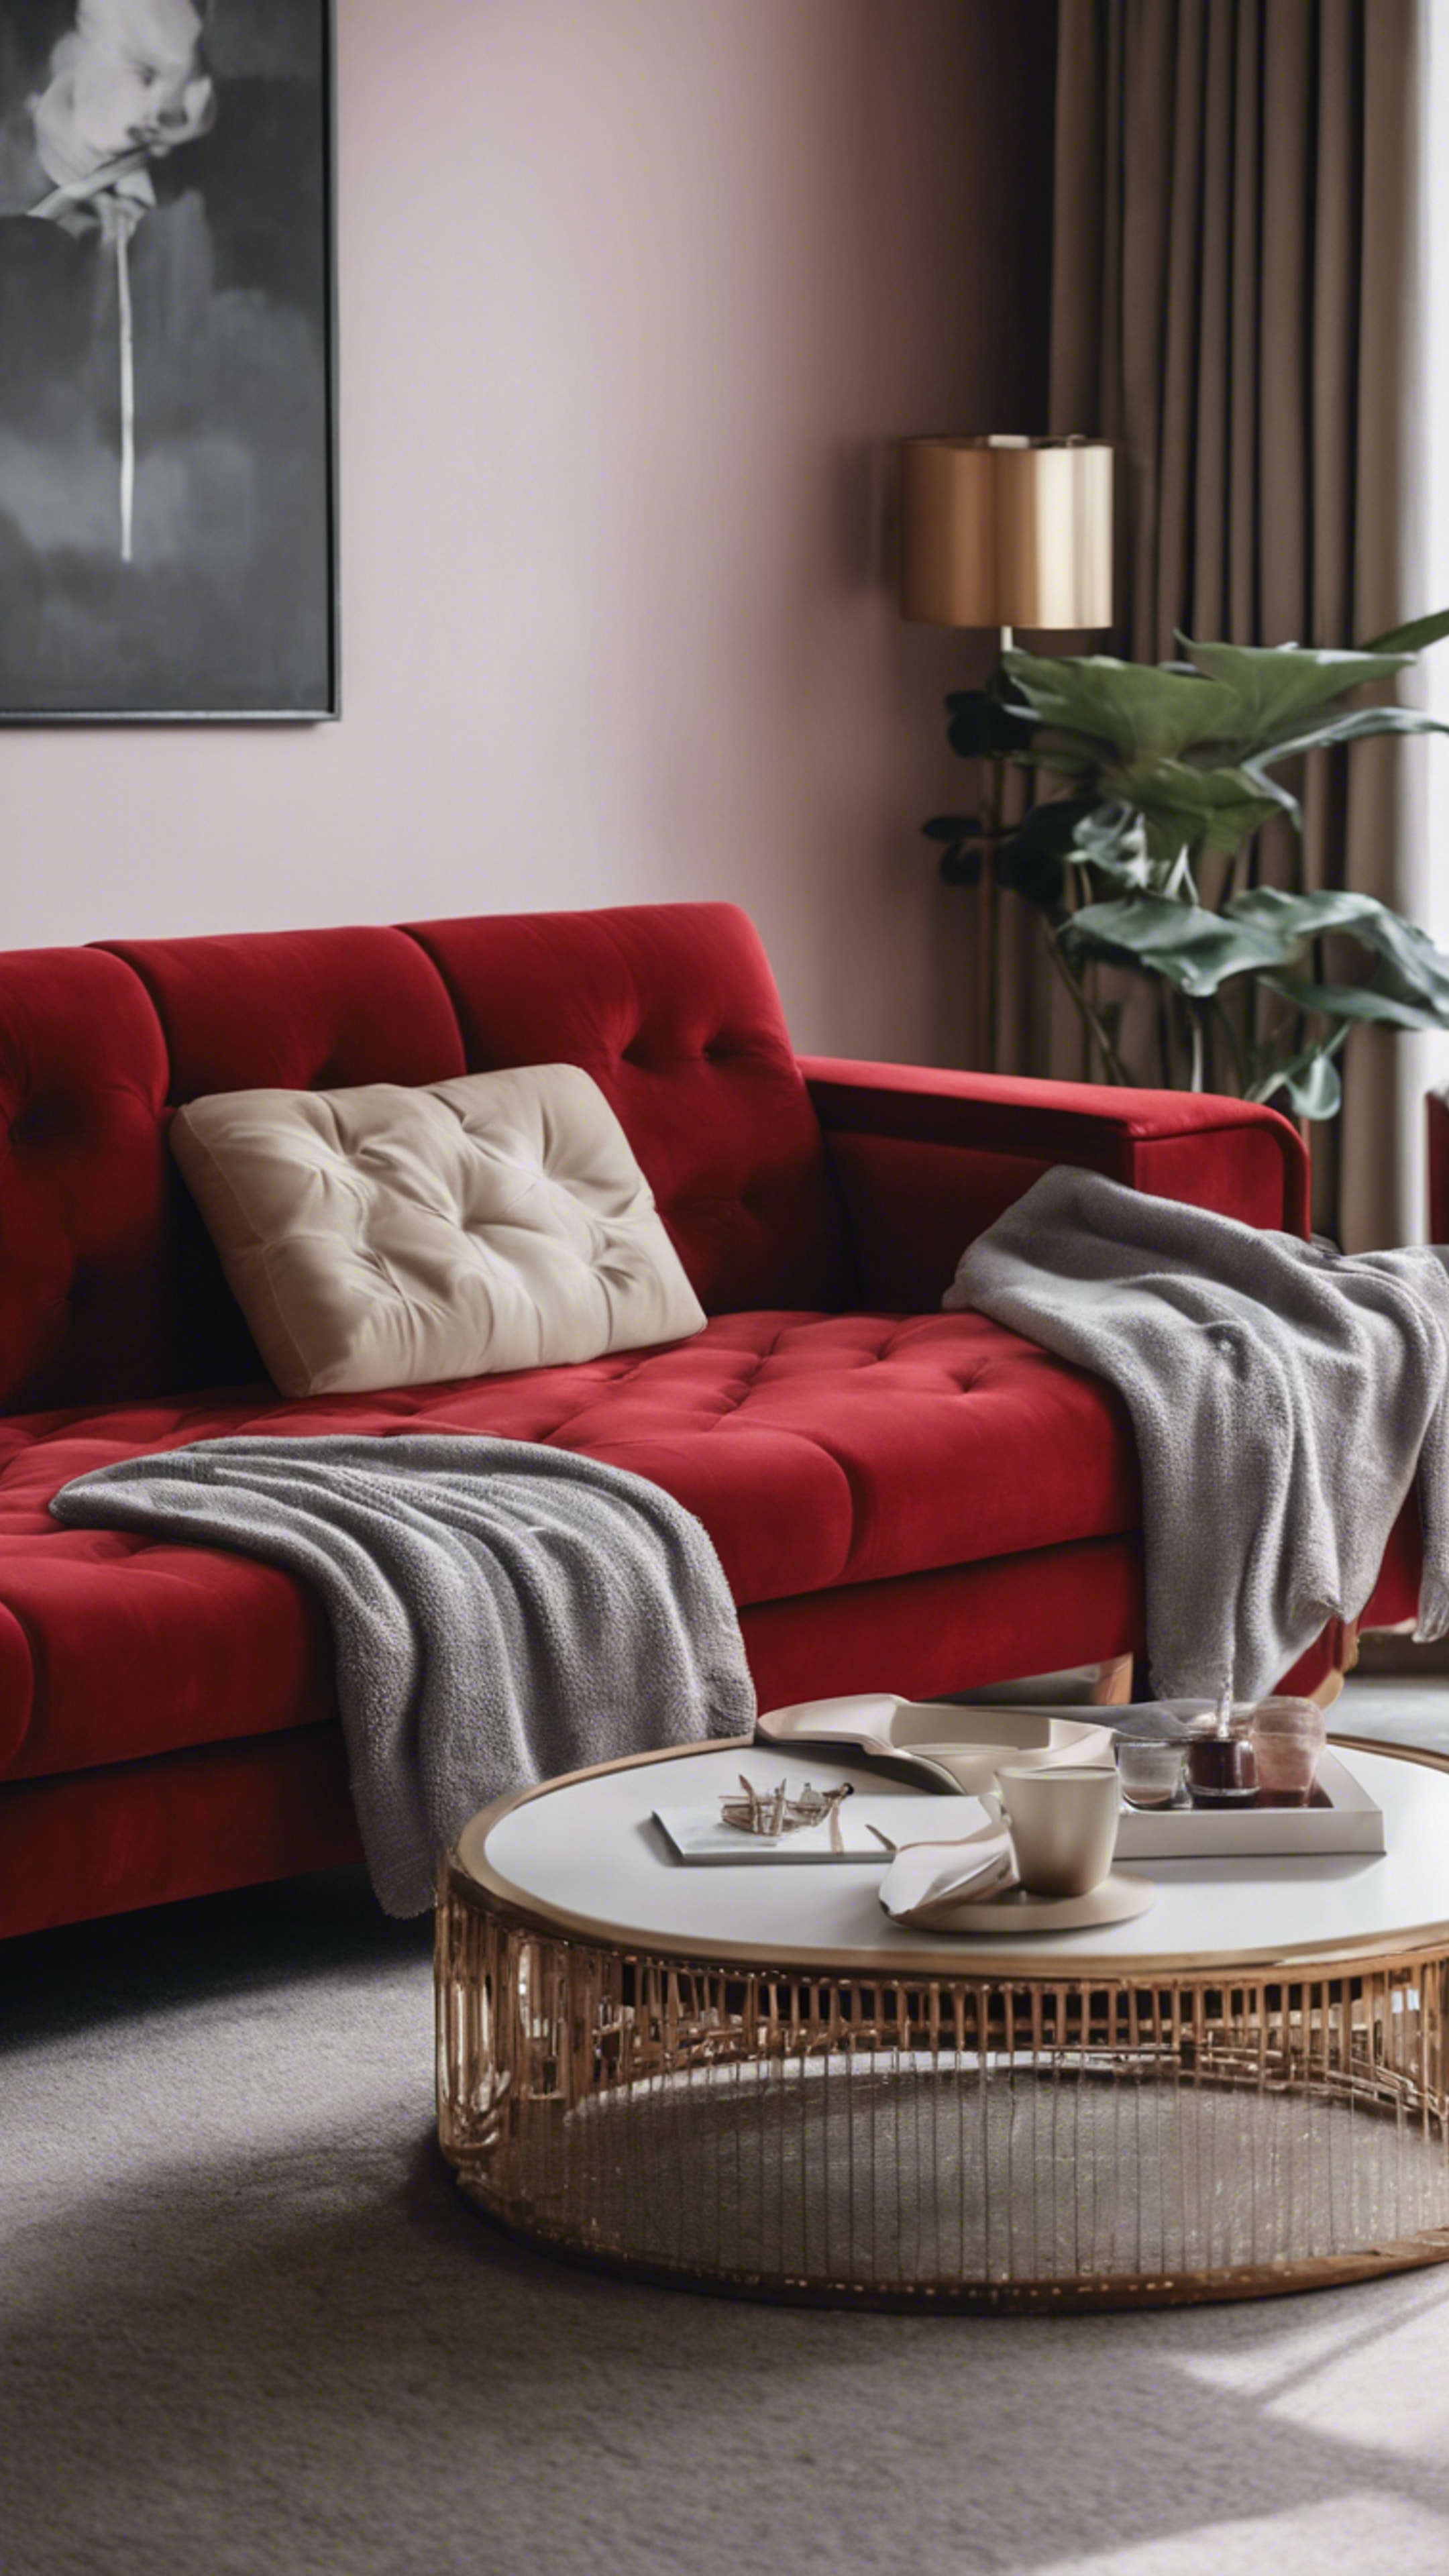 A luxurious red velvet sofa in a minimalistic modern living room, its color standing out in an otherwise neutral scene. Tapeta[9f5c54c2b7d04d069b86]